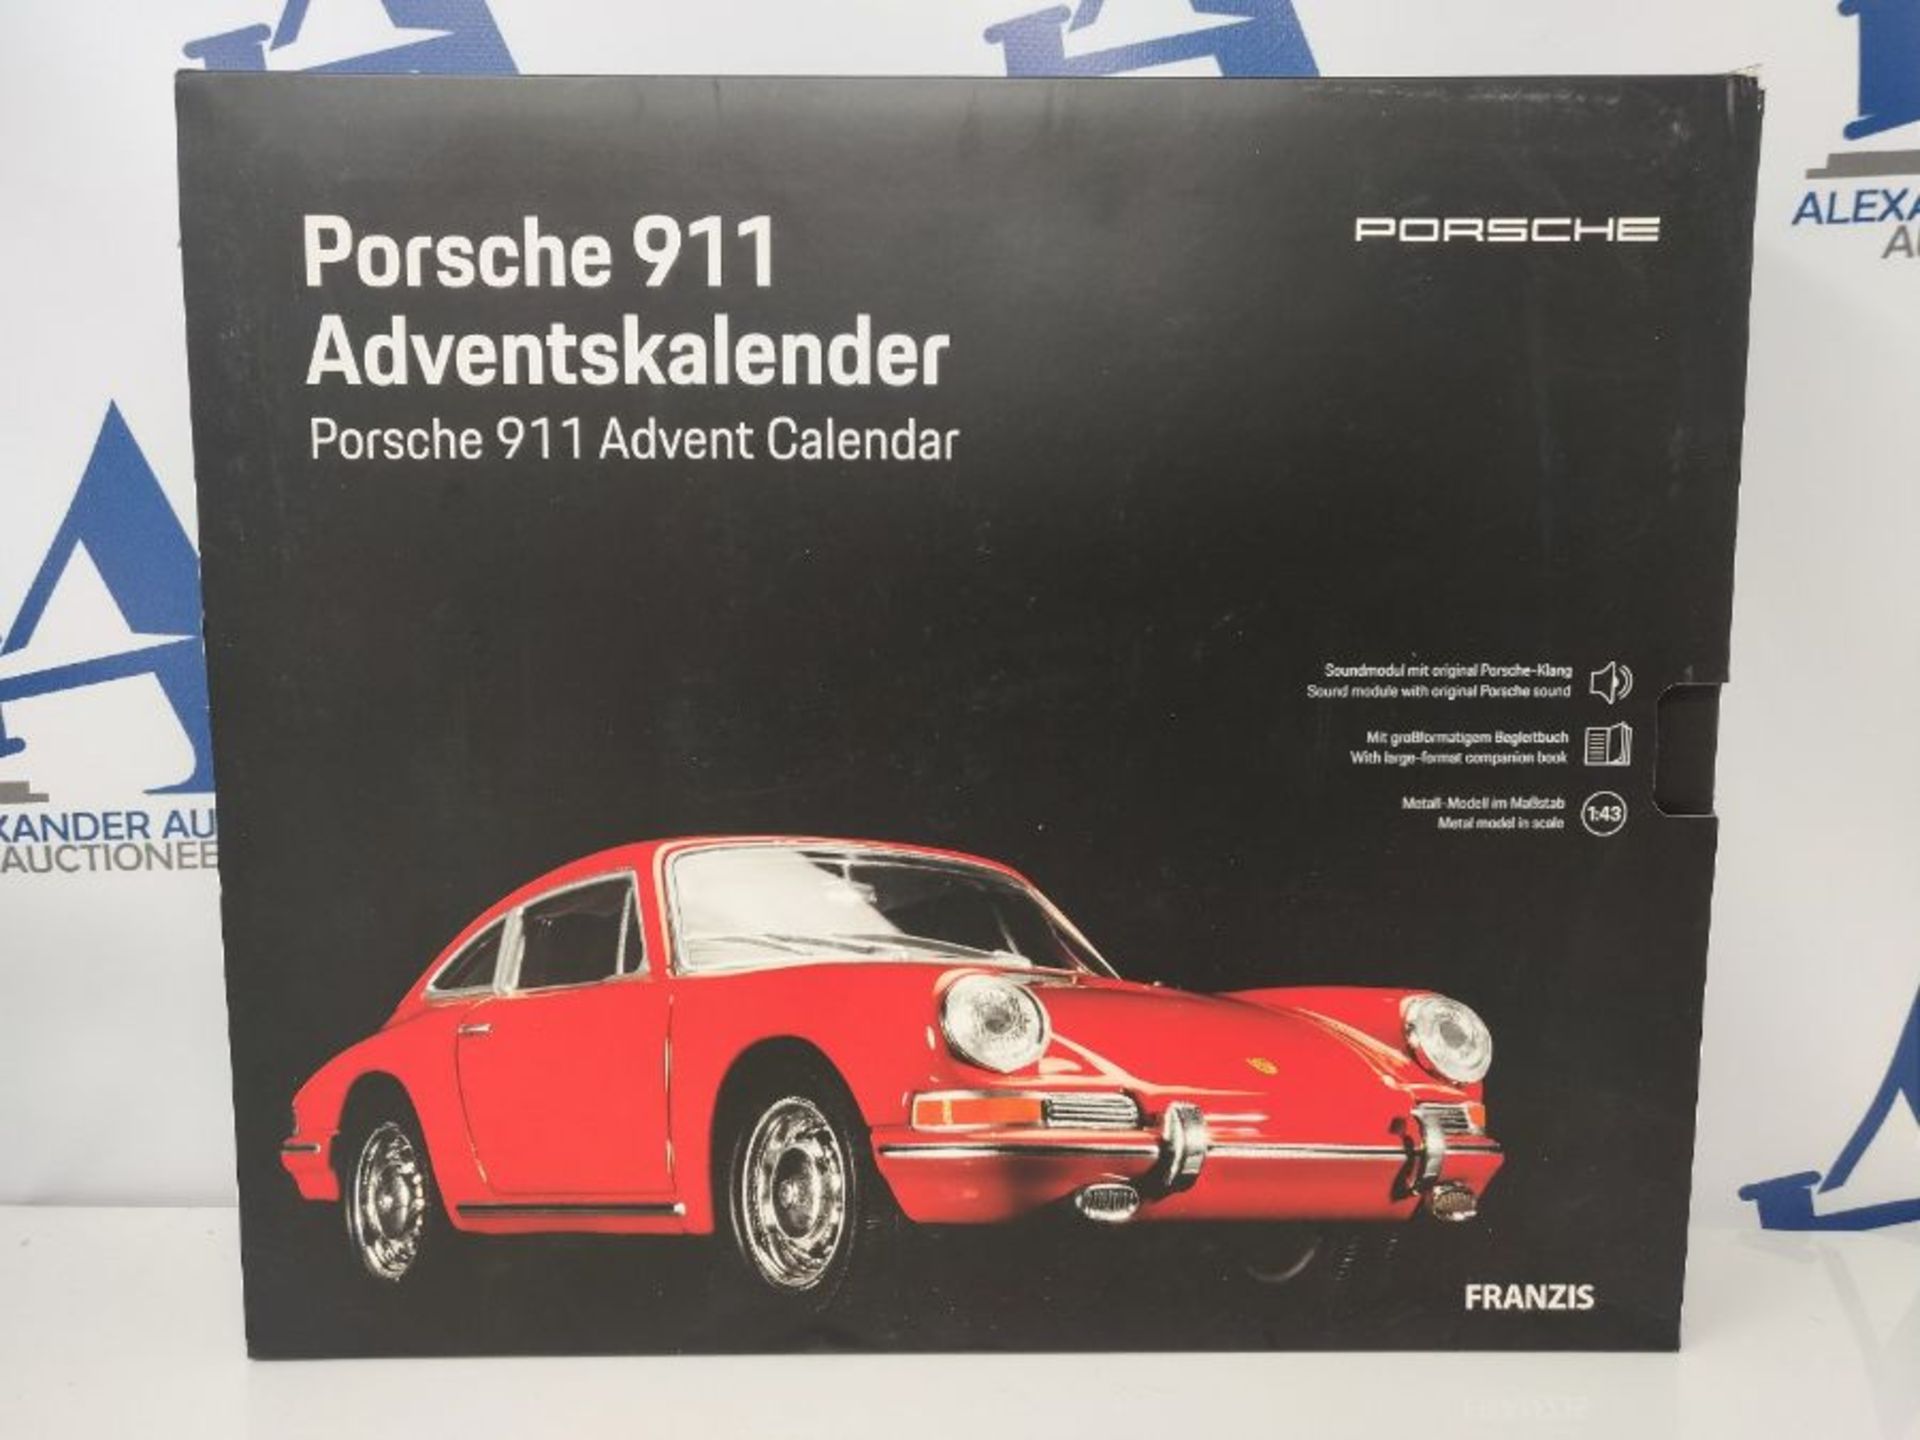 RRP £53.00 Franzis Porsche 911 55199-3 Advent Calendar Red Vehicle Kit Scale 1:43 with Sound Modu - Image 2 of 3